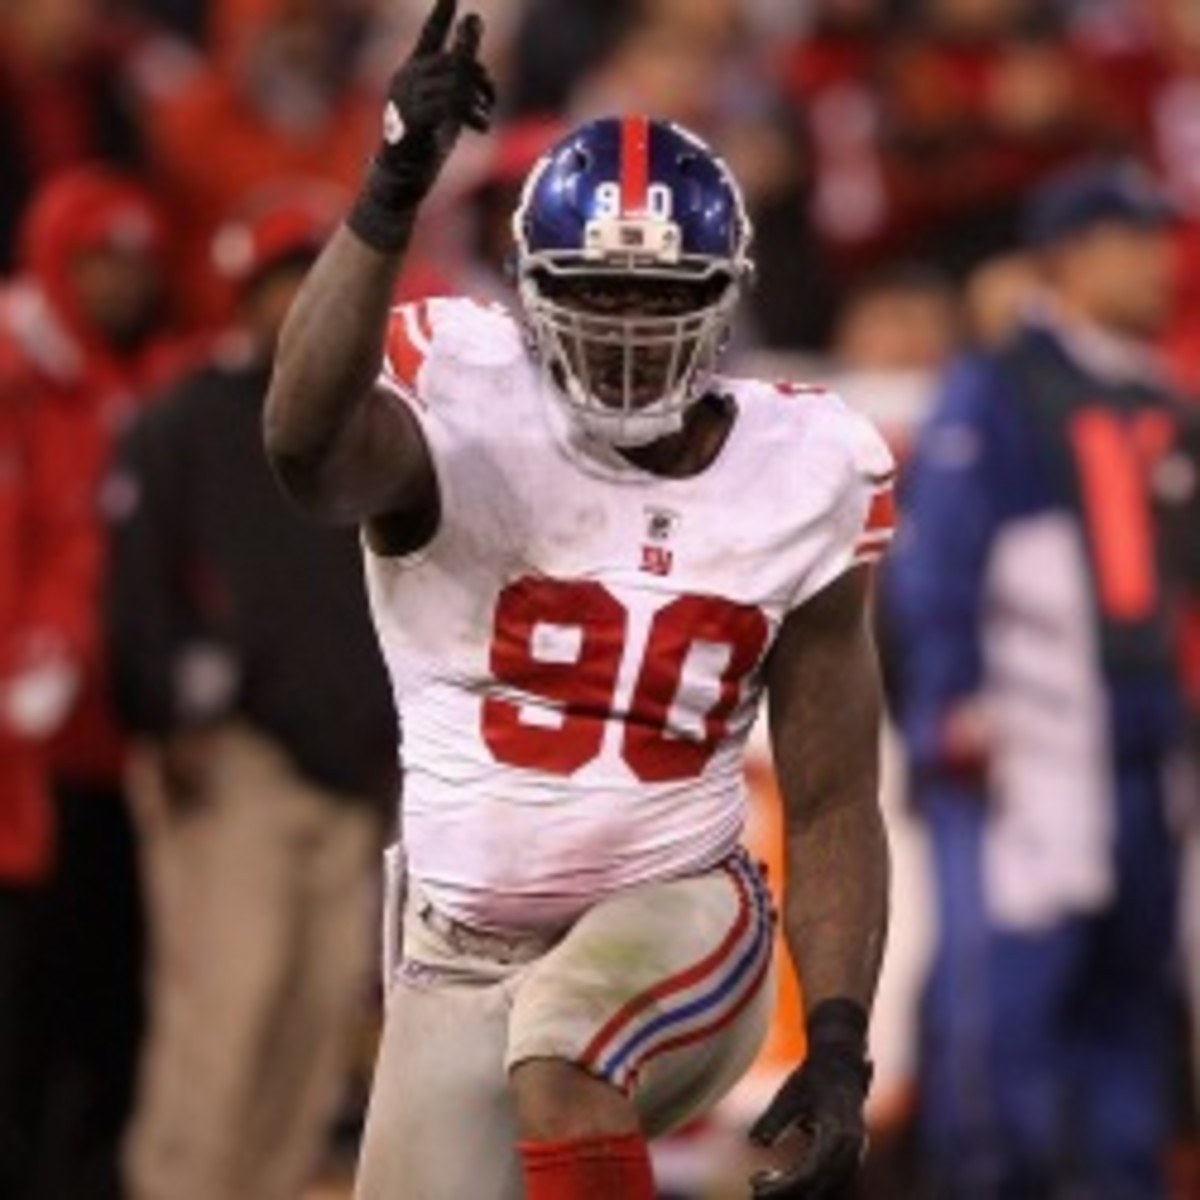 Giants defensive end Jason Pierre-Paul says the team "can't B.S." next season. (Jamie Squire/Getty Images)